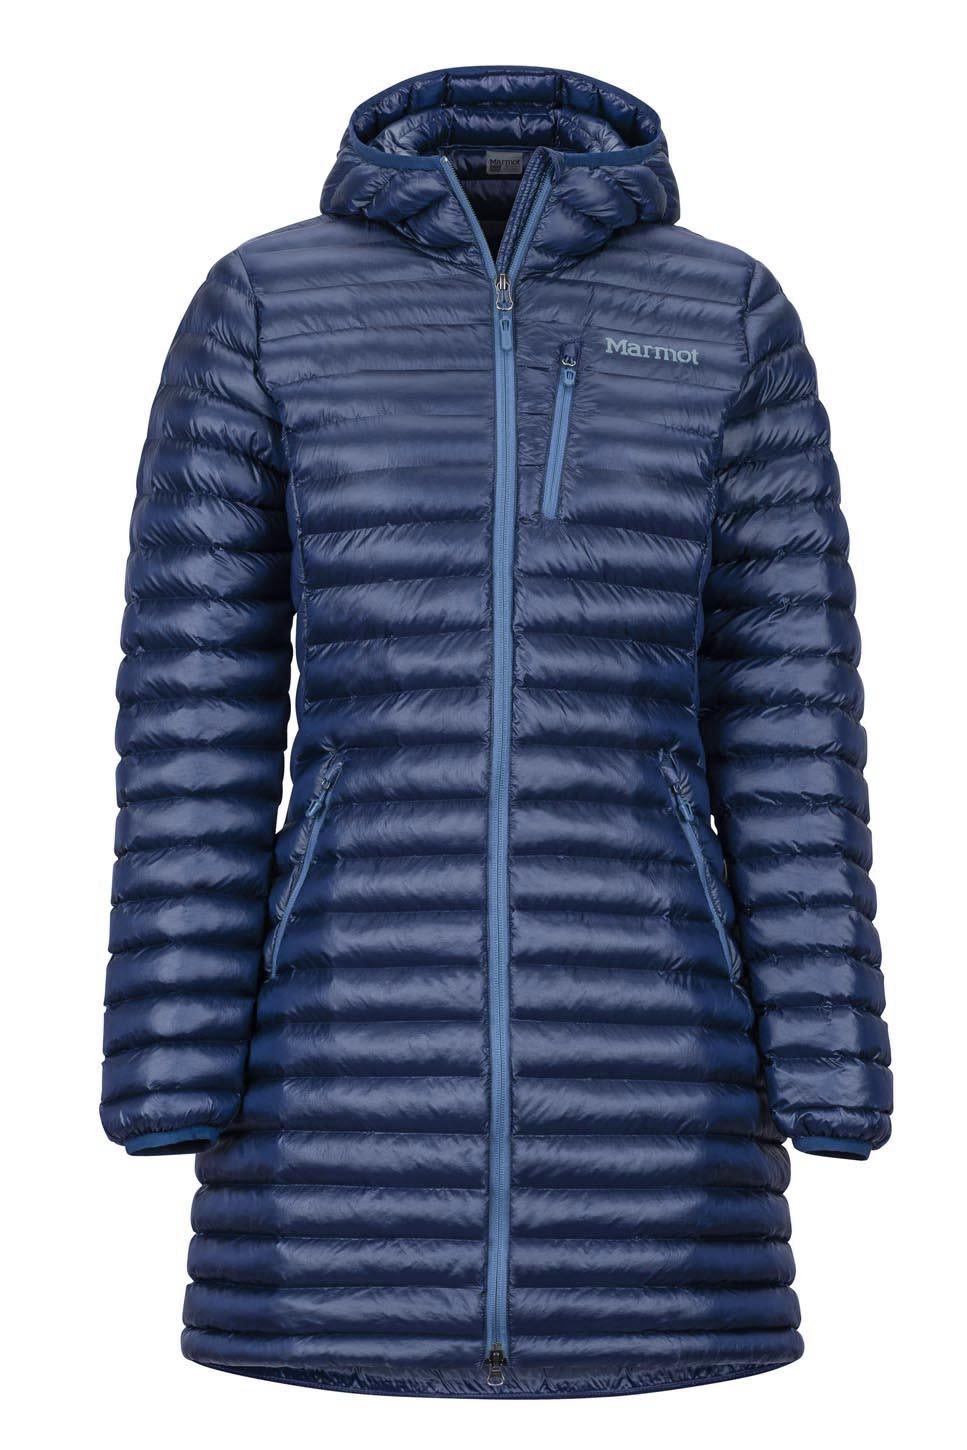 Marmot Long Avant Featherless Hoody Blau- Female Thinsulate- Ponchos und Capes- Grsse S - Farbe Arctic Navy